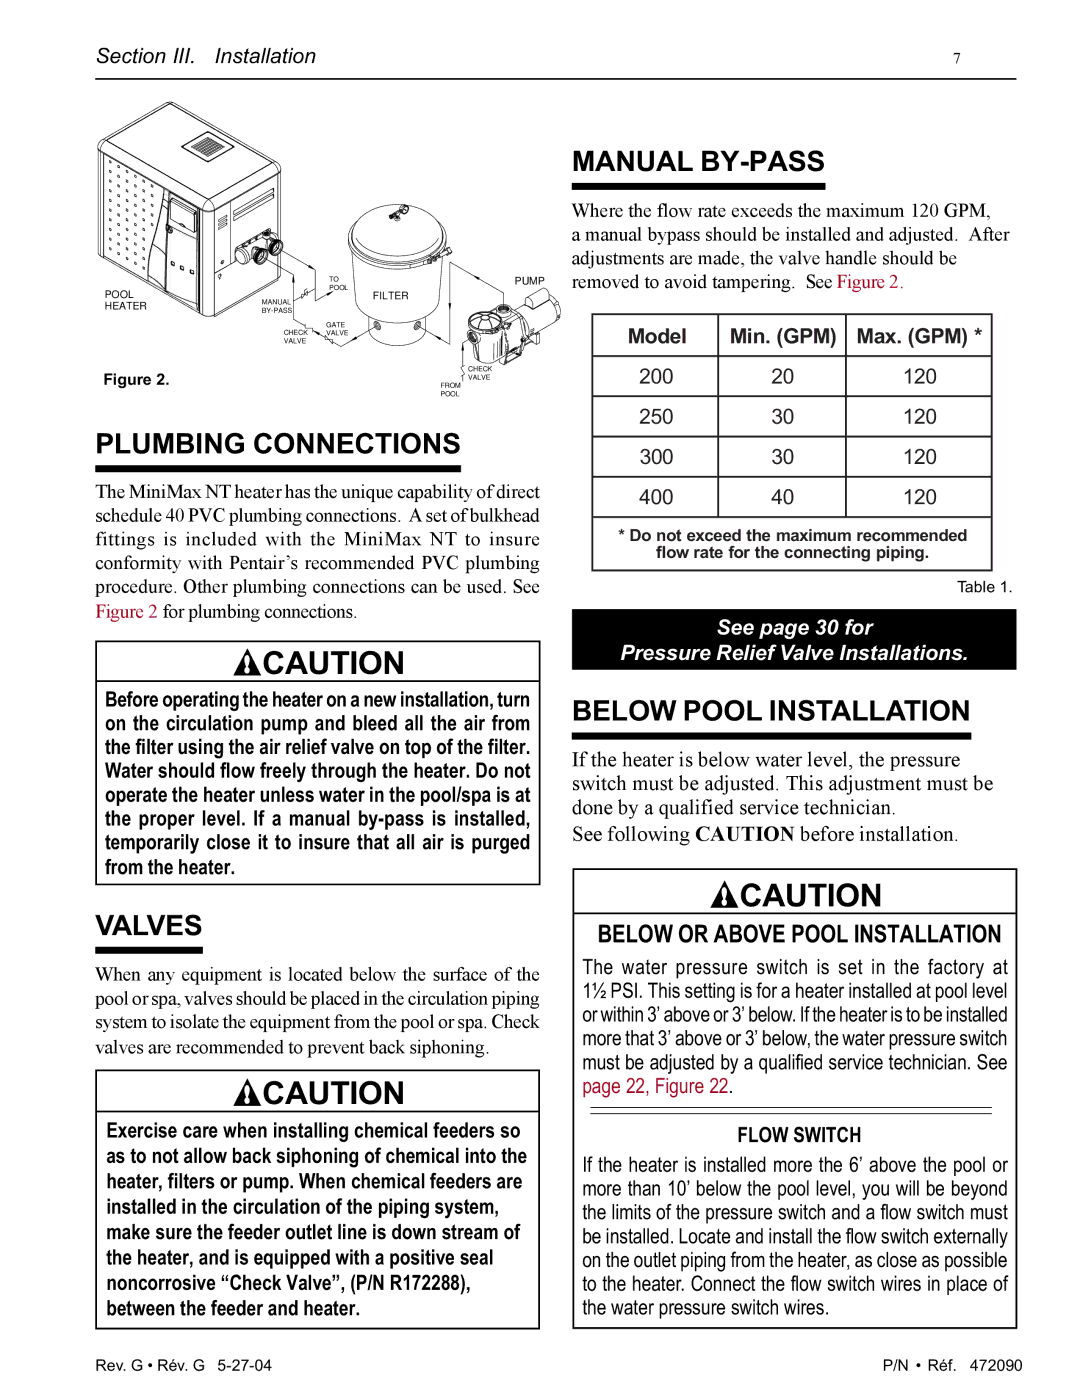 Pentair 200 installation manual Plumbing Connections, Valves, Manual BY-PASS, Below Pool Installation 